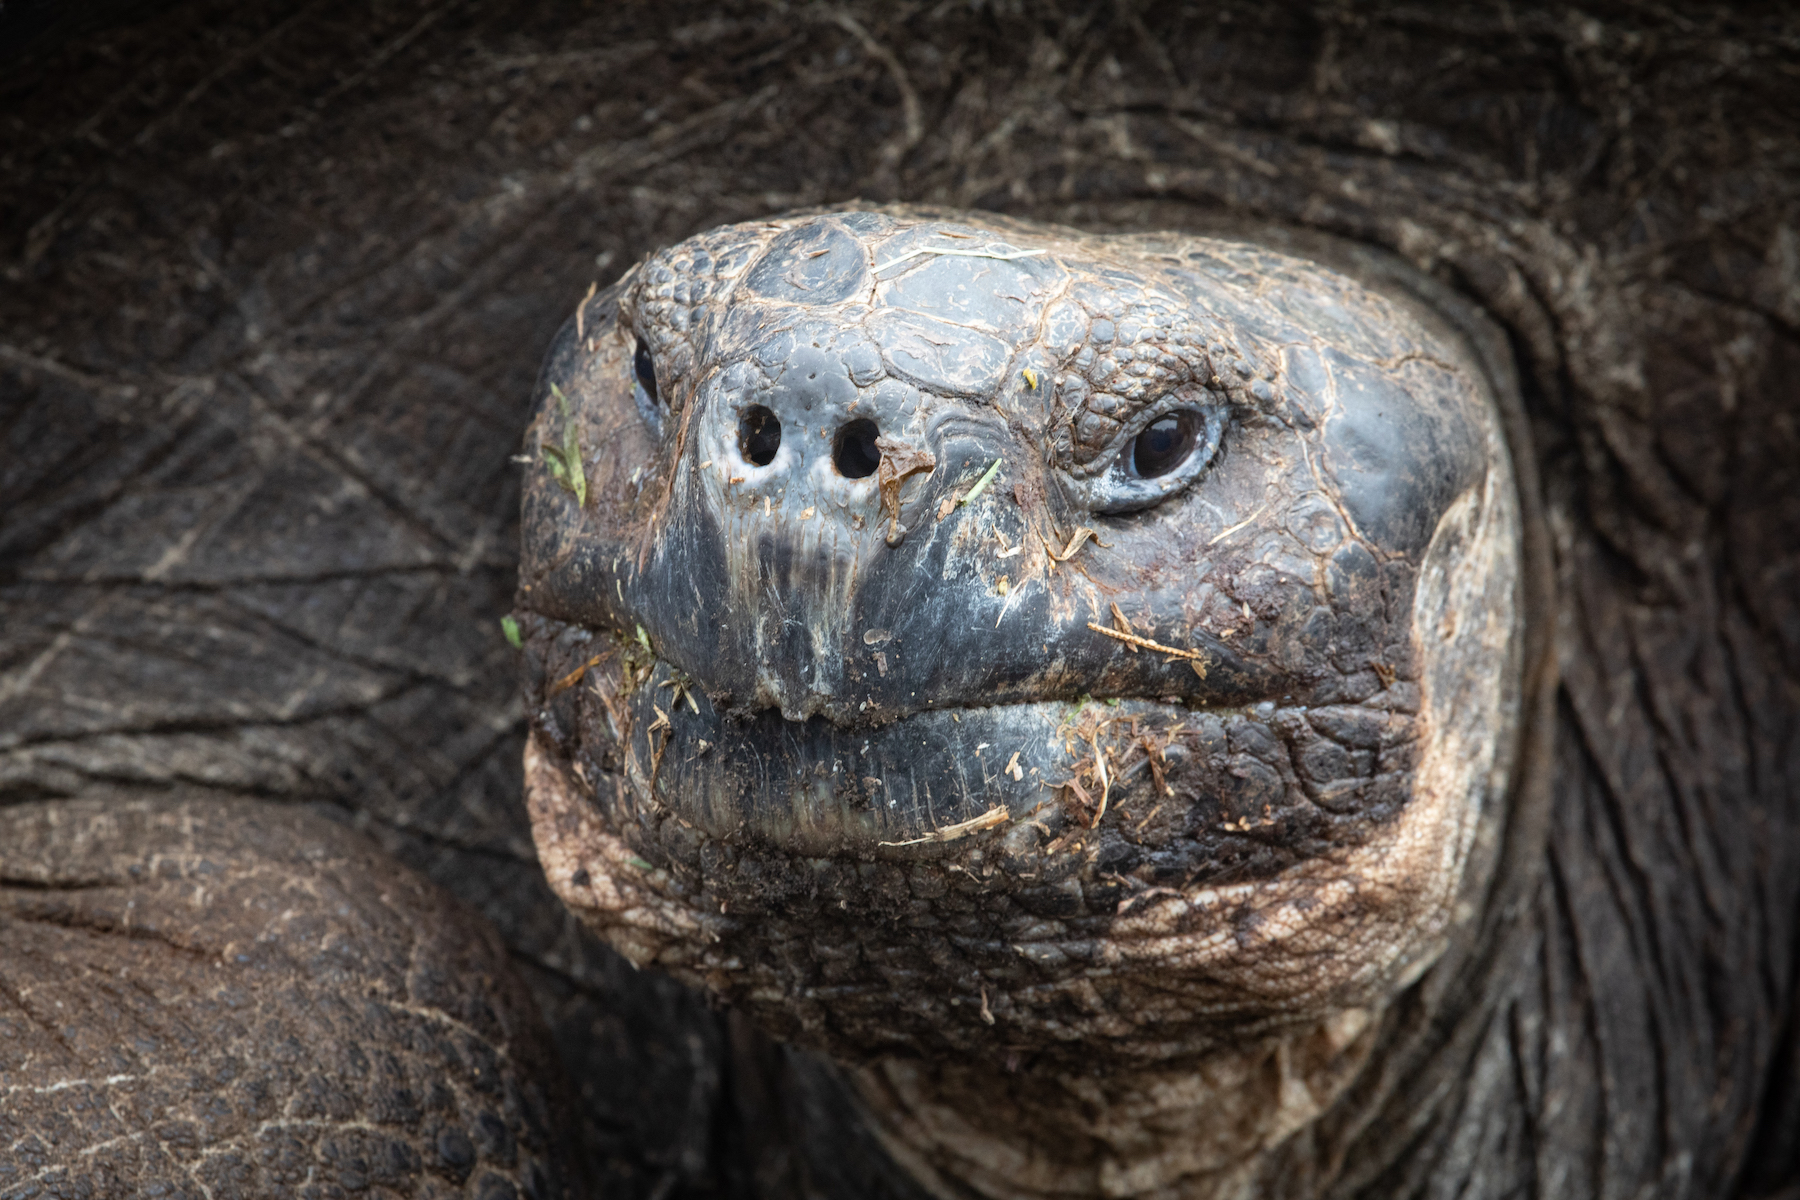 One of the finer older gents of the Galapagos. Portrait of an elderly Galapagos Tortoise (image by Inger Vandyke)